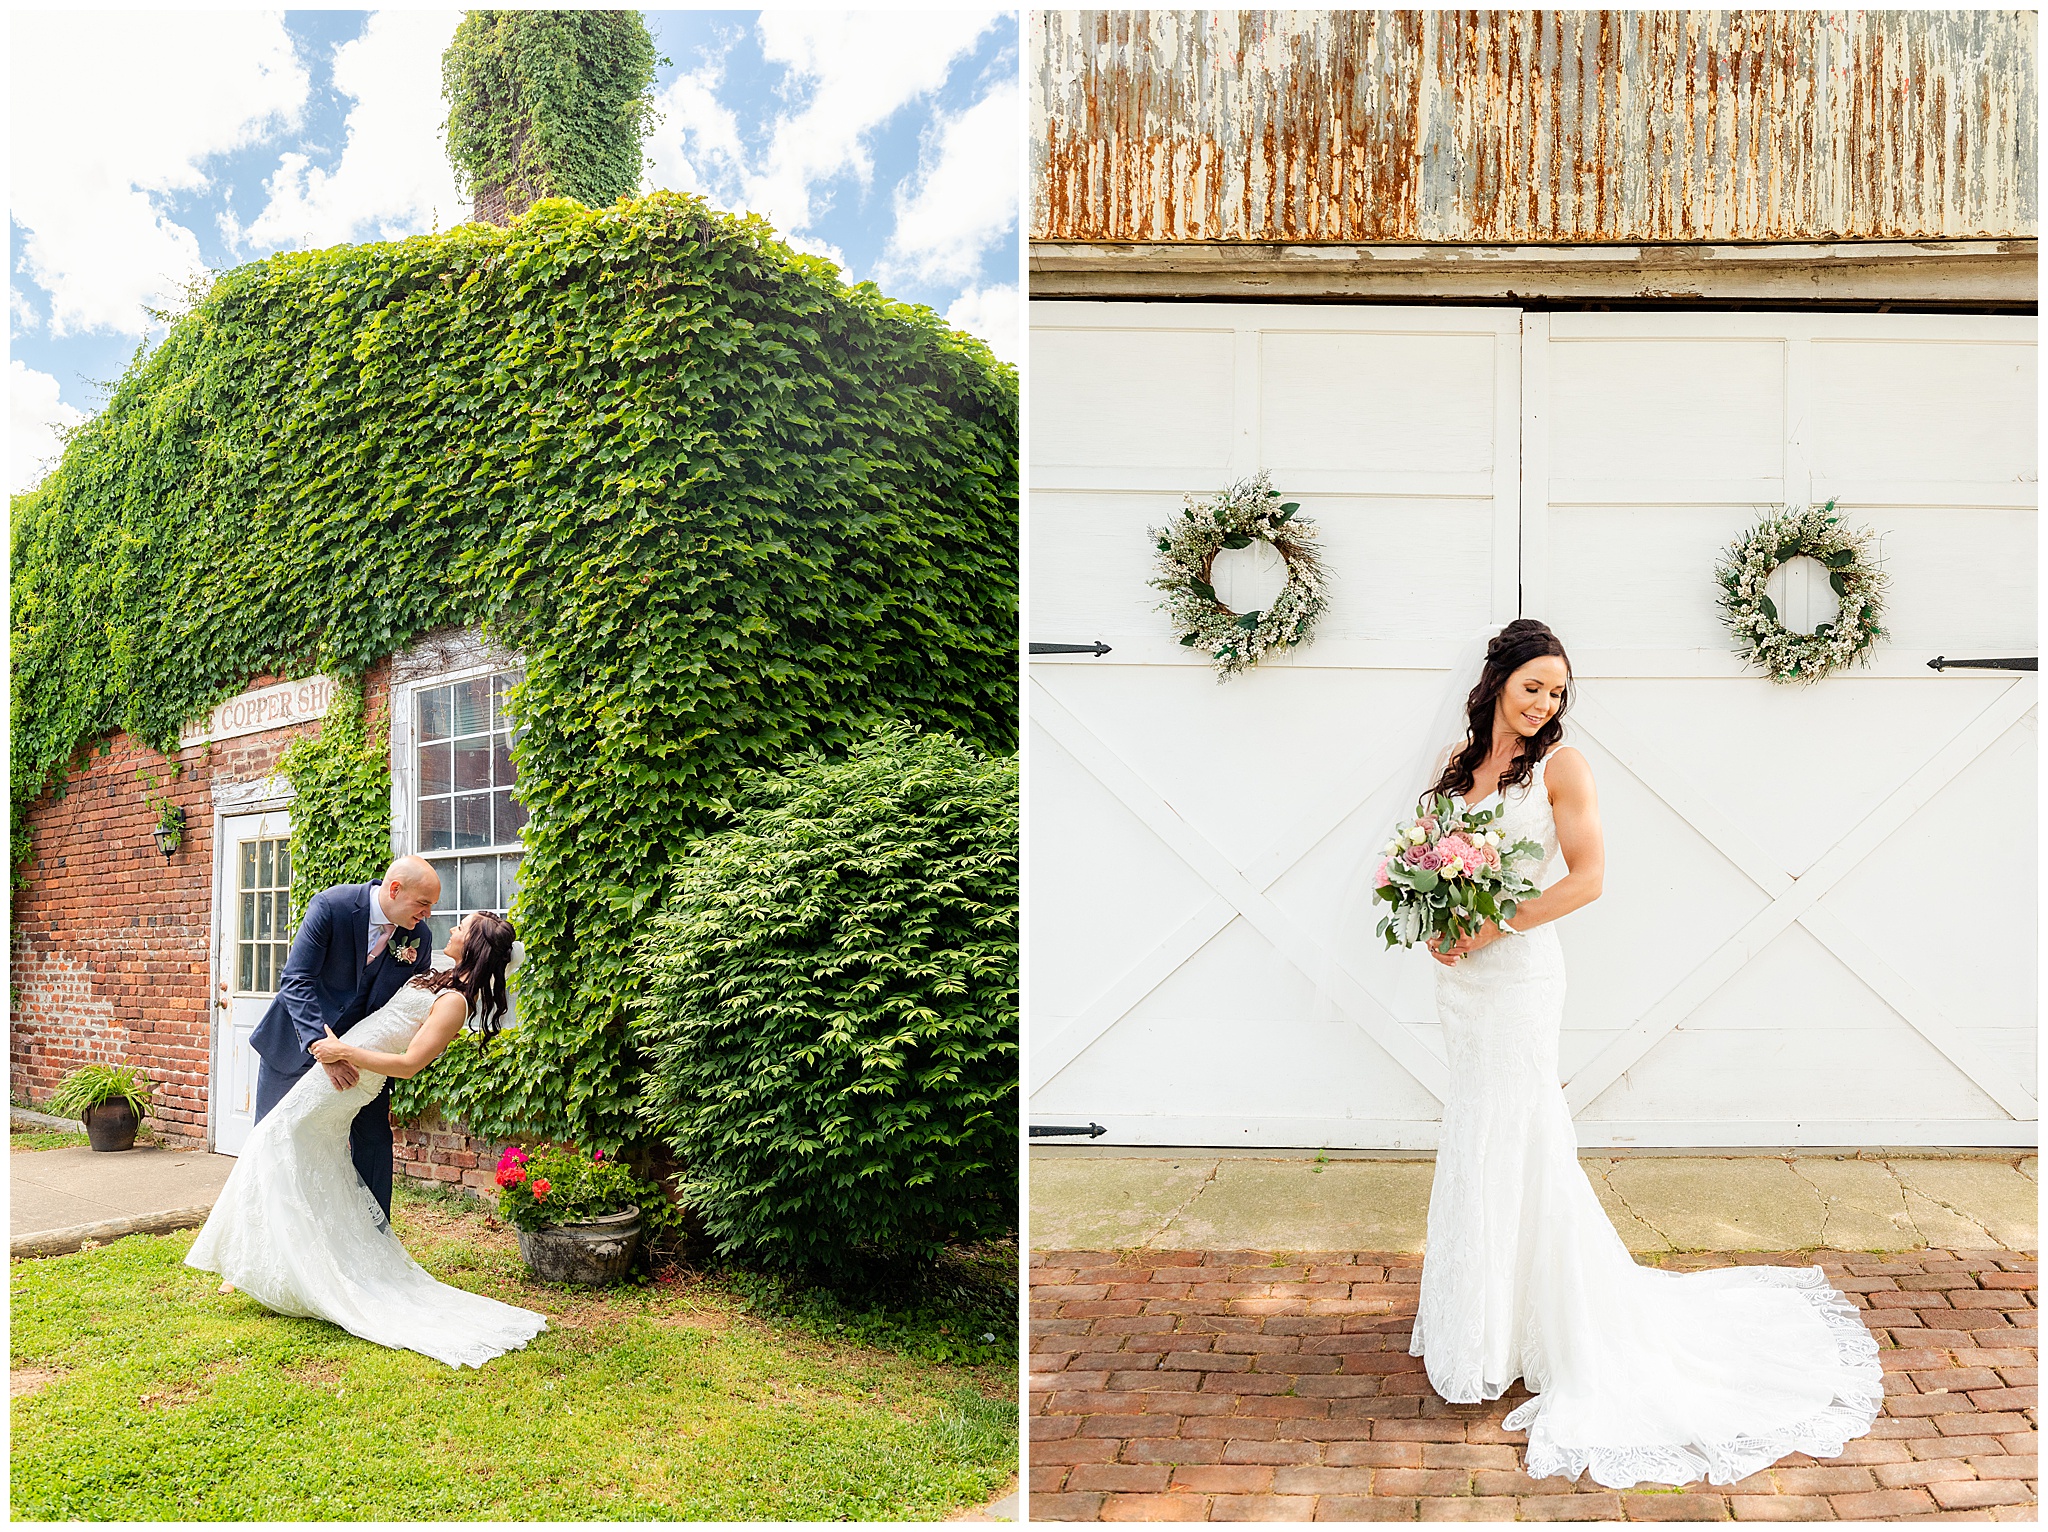 A bride in a white lace dress gets dipped by her new husband in front of a brick building covered in ivy Wedding Venues in Virginia